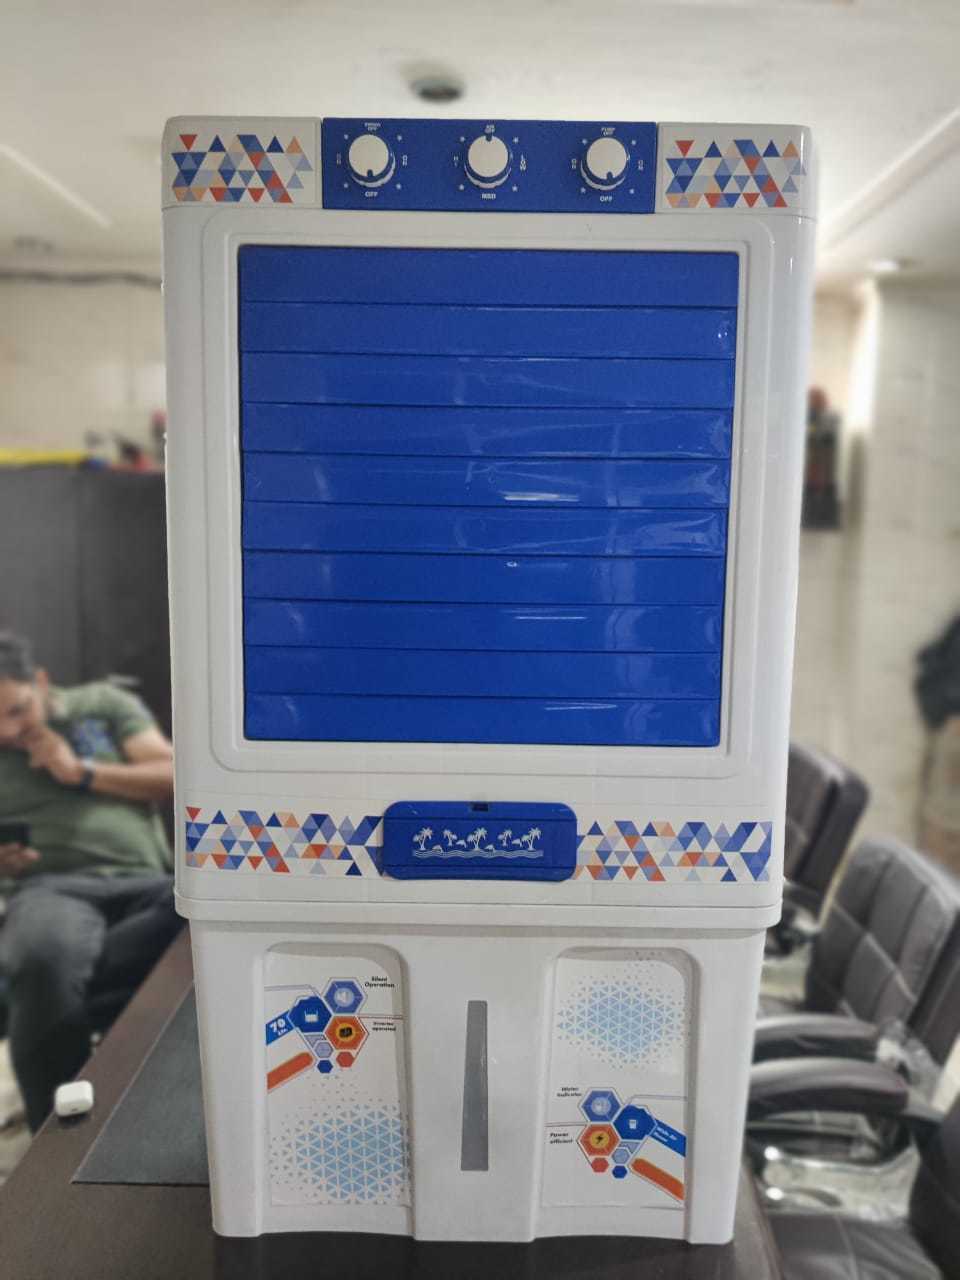 16 Inch Tower Air Cooler